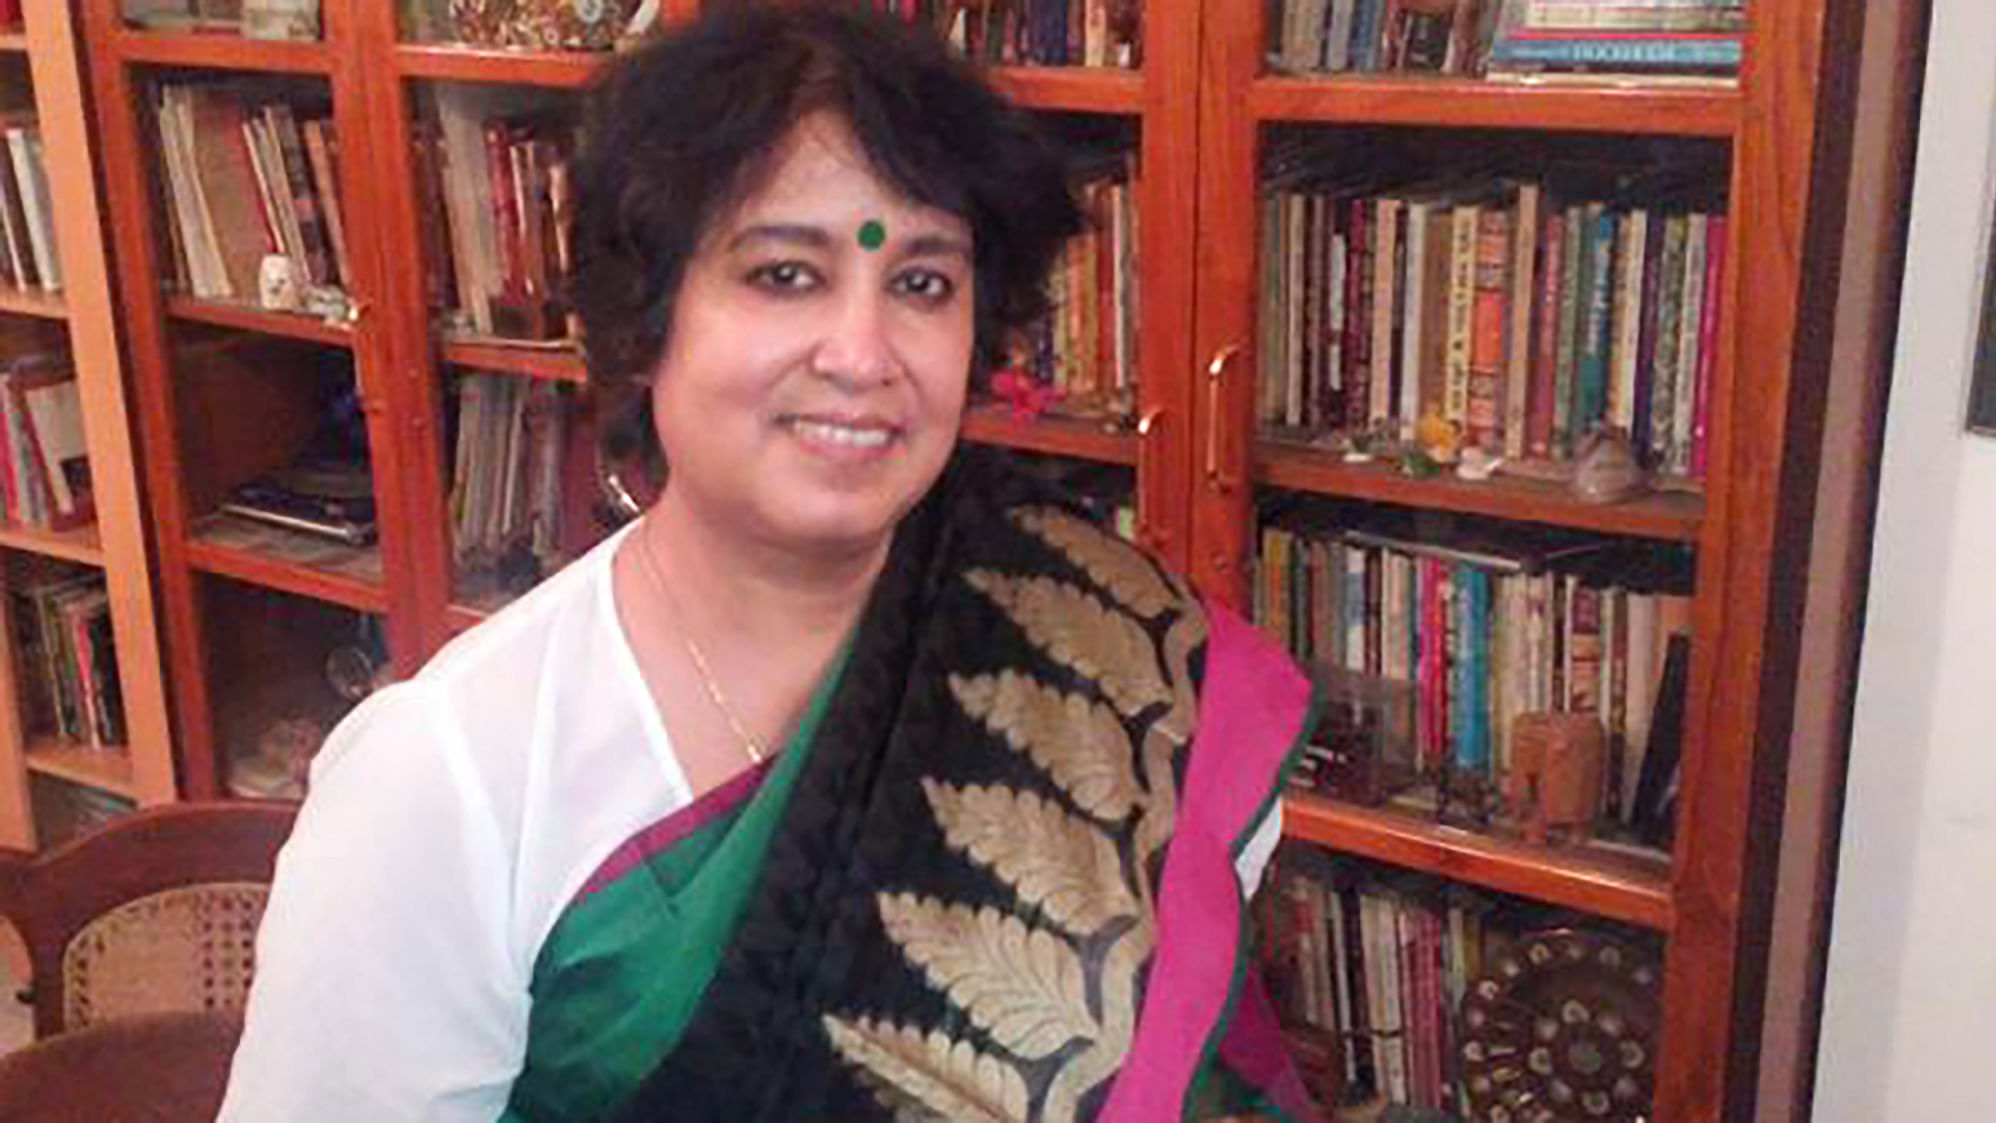 Taslima Nasrin has expressed anger at the ‘double standards’ of Indian authors. (Photo: <a href="https://twitter.com/taslimanasreen/status/651860720141905920">Twitter</a>)